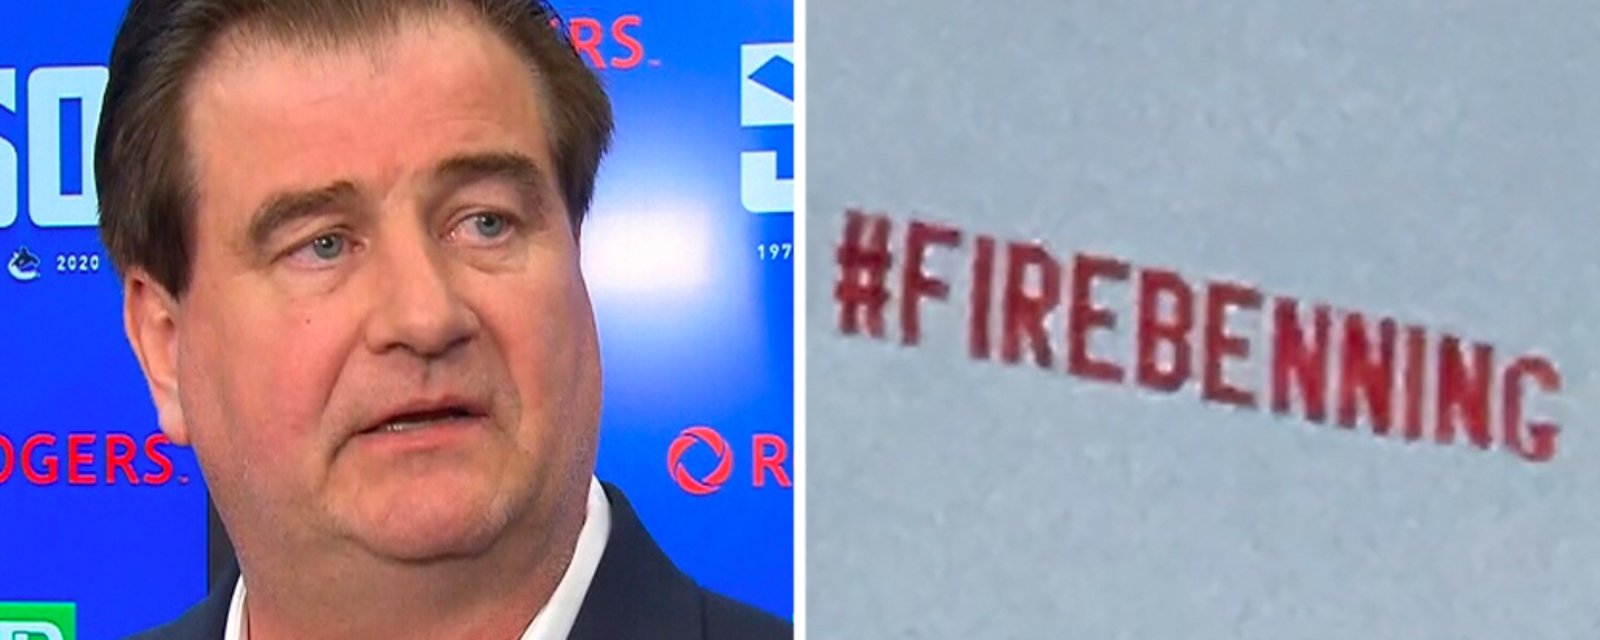 Canucks fans fly “Fire Benning” sign over downtown Vancouver